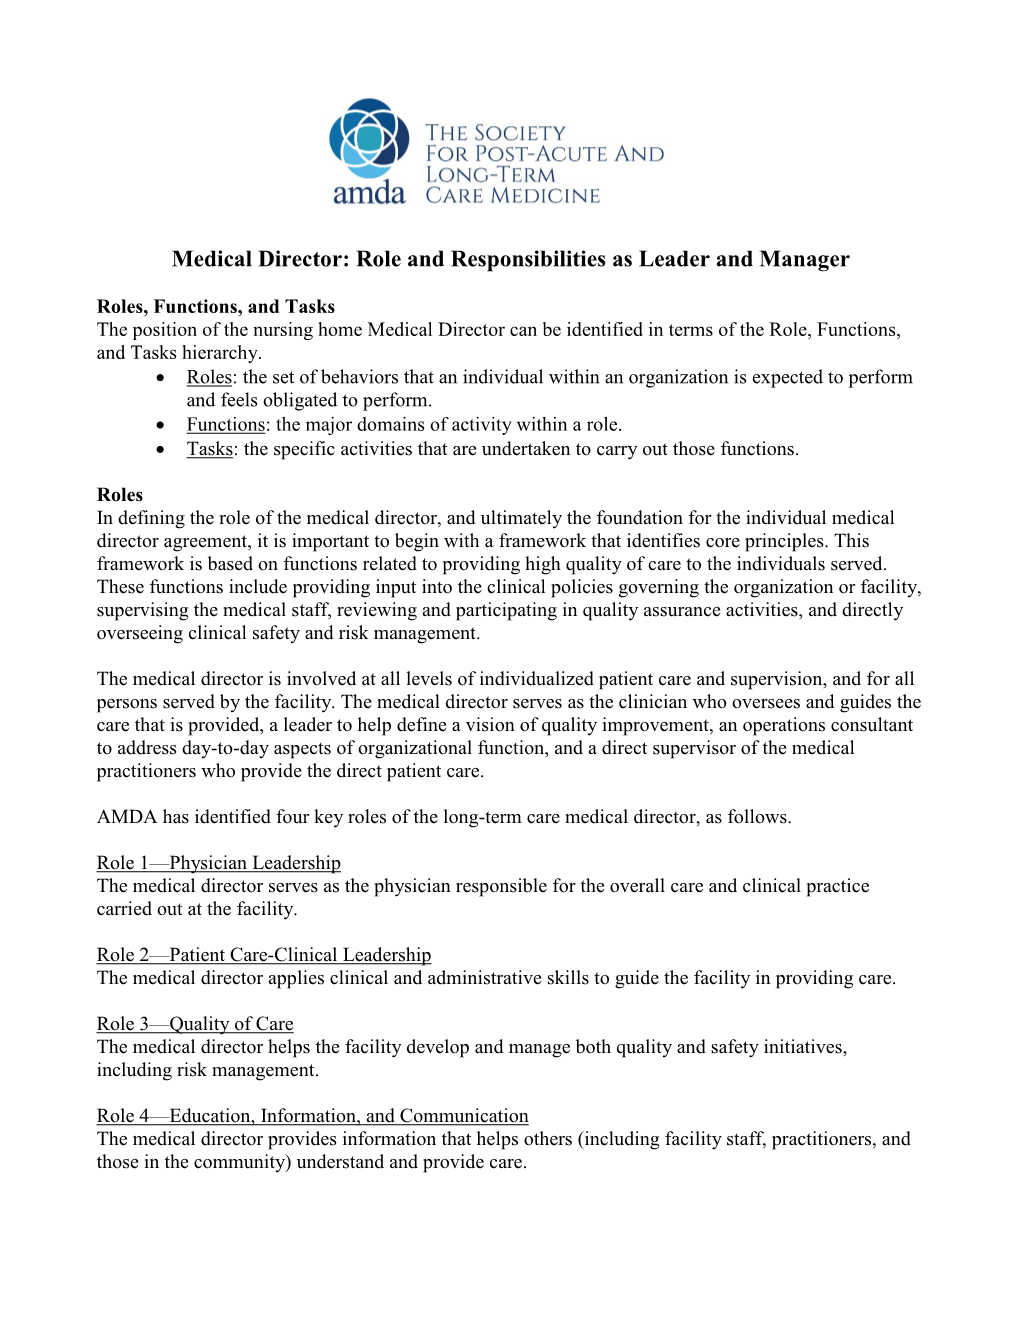 Medical Director: Role and Responsibilities As Leader and Manager